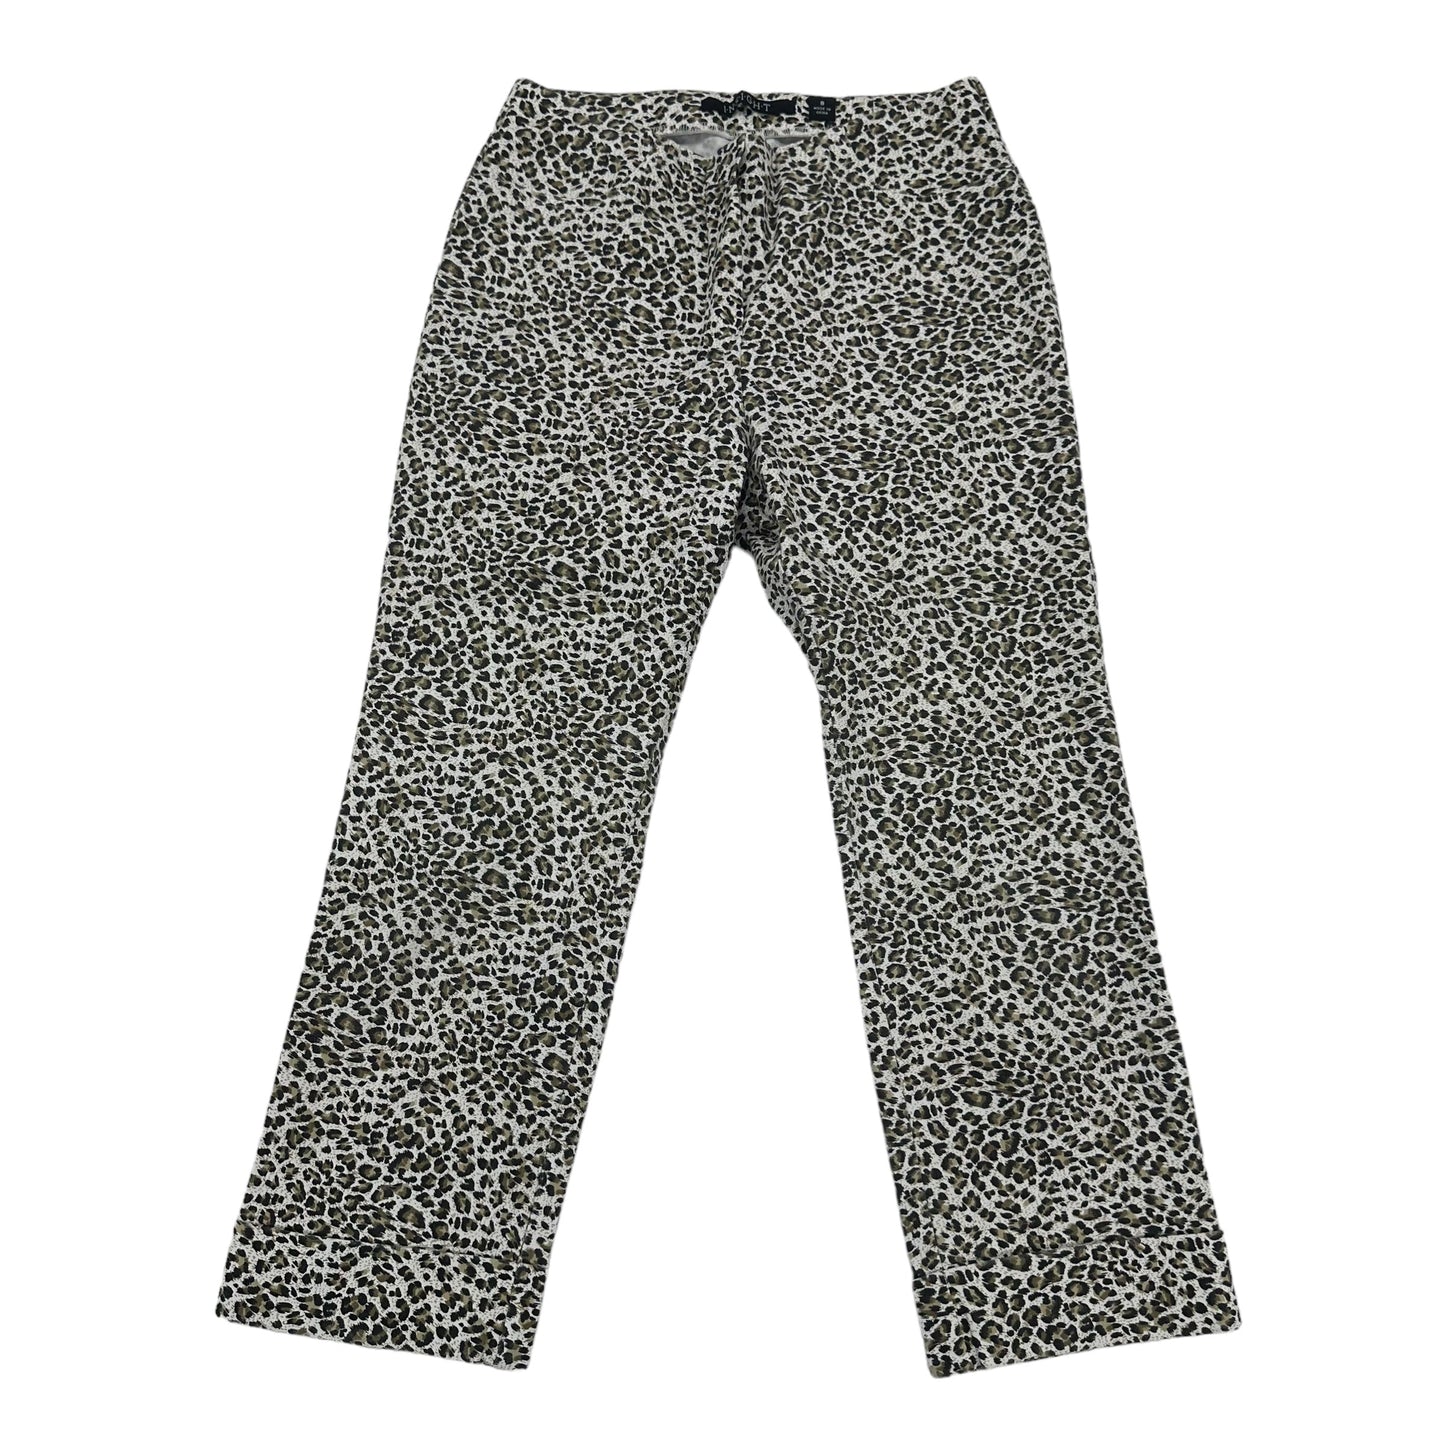 ANIMAL PRINT    CLOTHES MENTOR PANTS CROPPED, Size 8